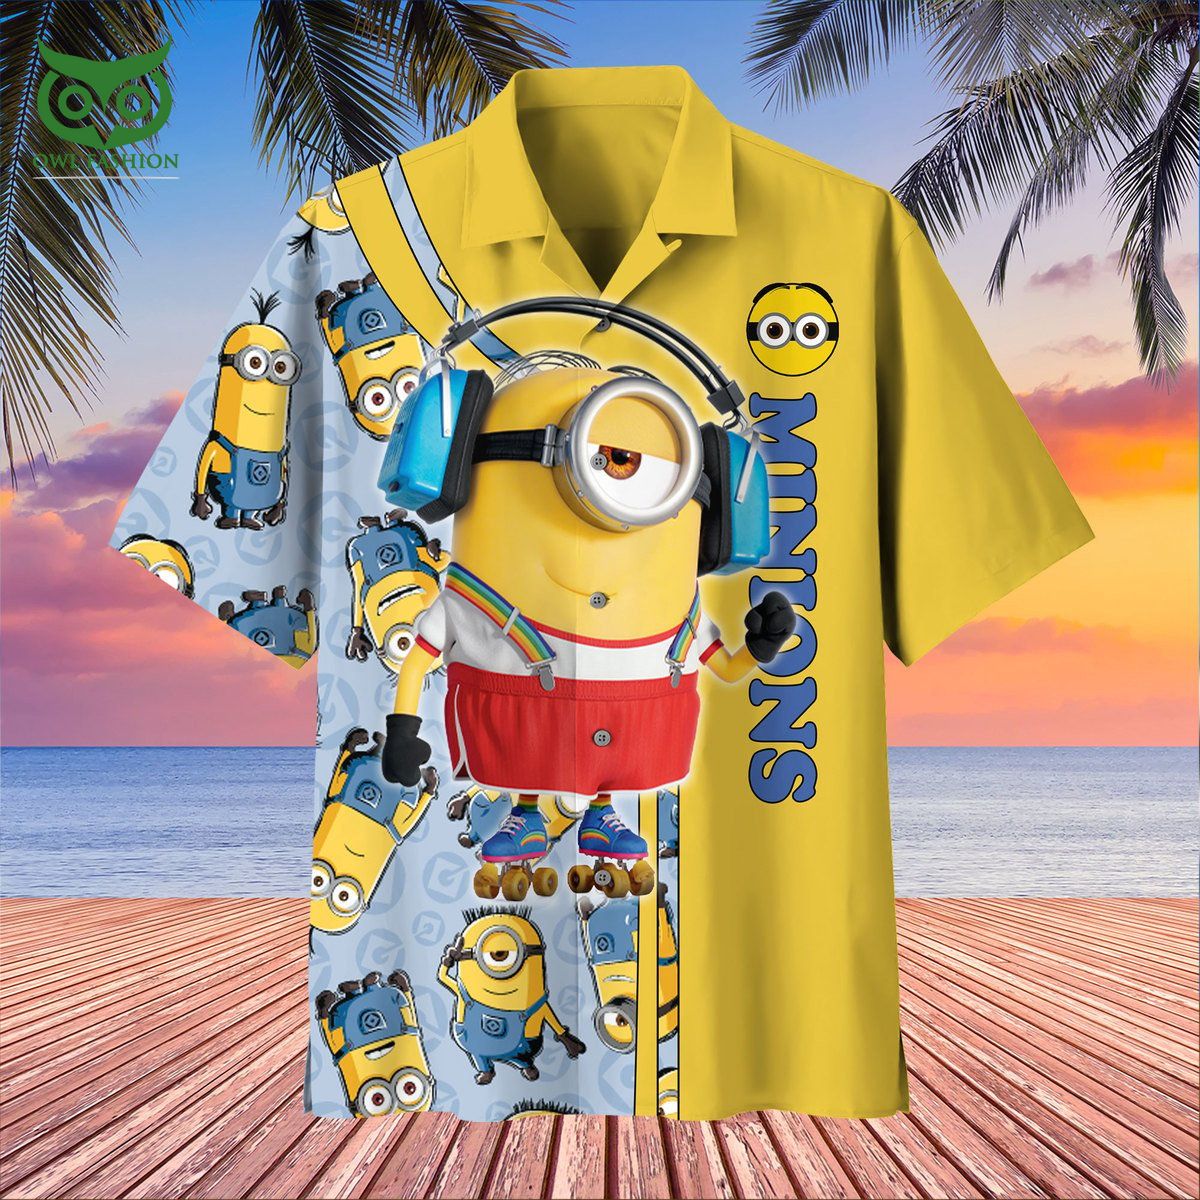 Minion Despicable Me Limited Hawaiian Shirt This place looks exotic.